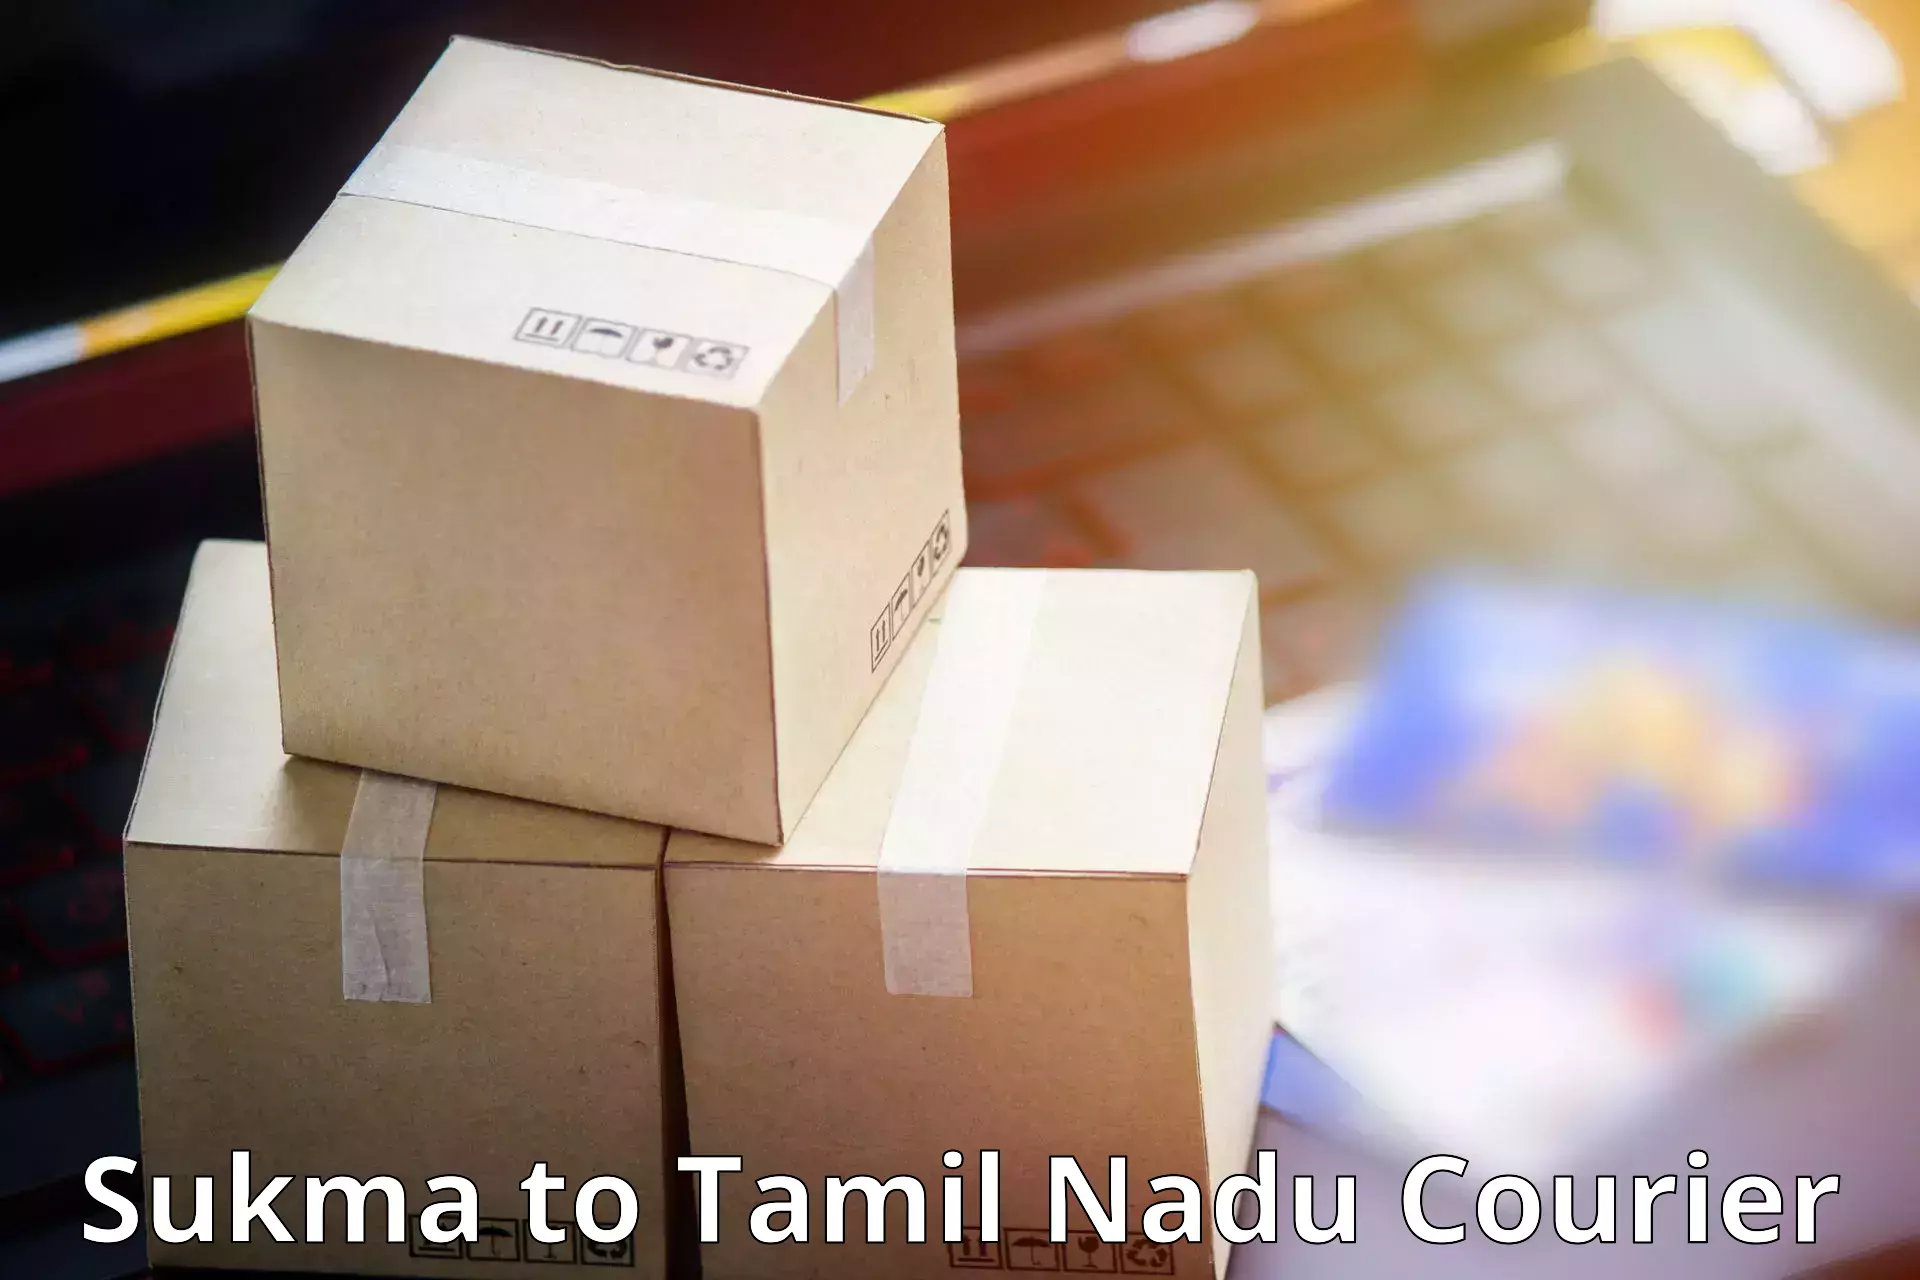 Seamless shipping service Sukma to SRM Institute of Science and Technology Chennai